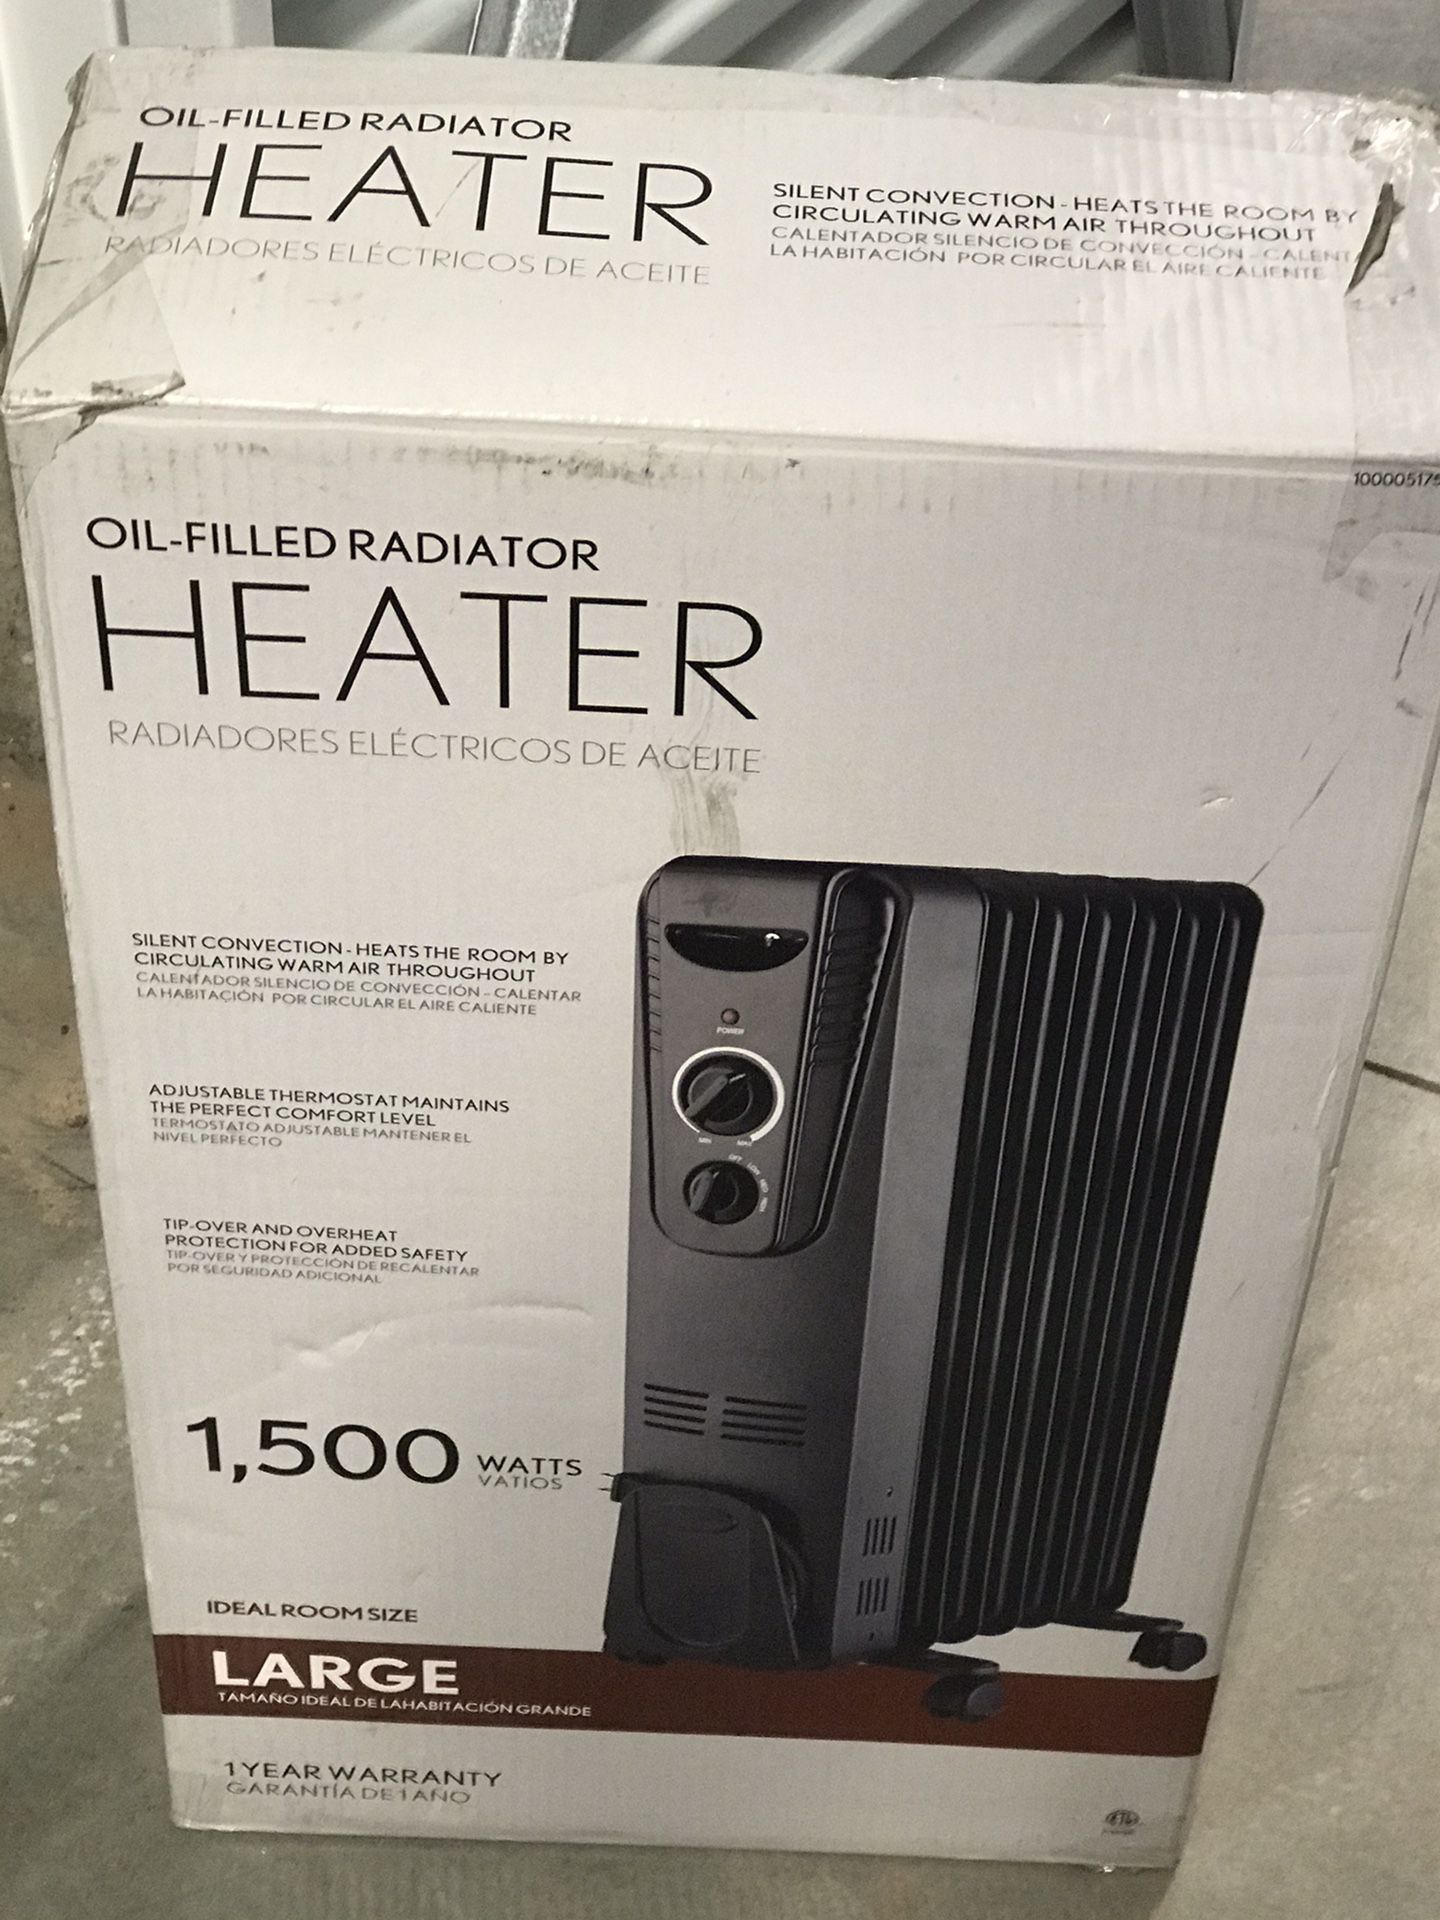 Portable Heaters Tip Over Safety Units -unit Turns Off If Unit Gets Knocked Over/ Two For 55. 00